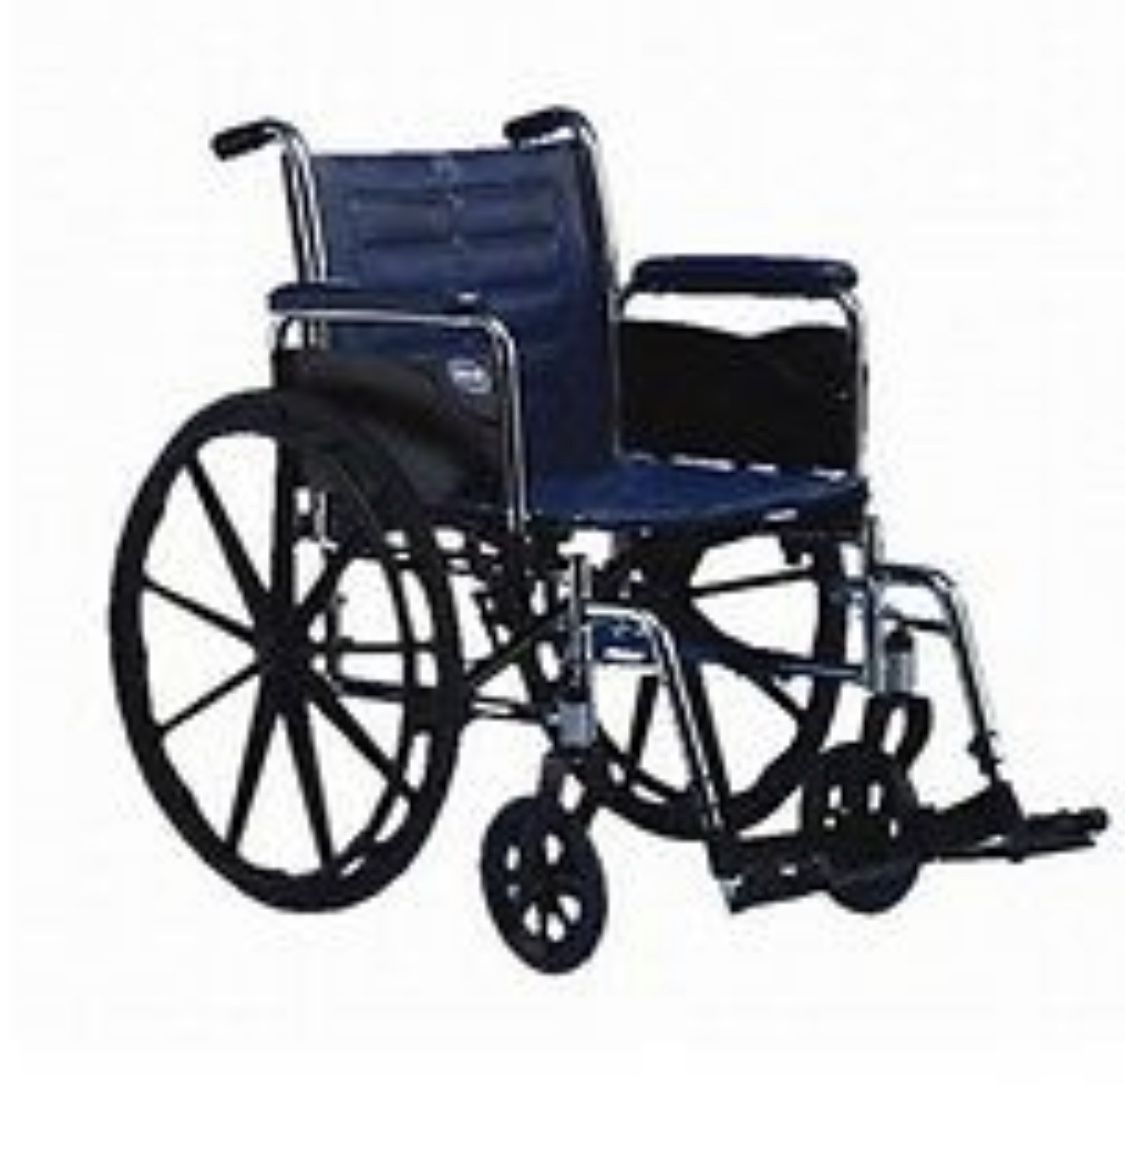 Invacare Tracer EX2 Manual Wheelchair (18"x16" Seat) w/o ELR LEG RESTS TREX26R